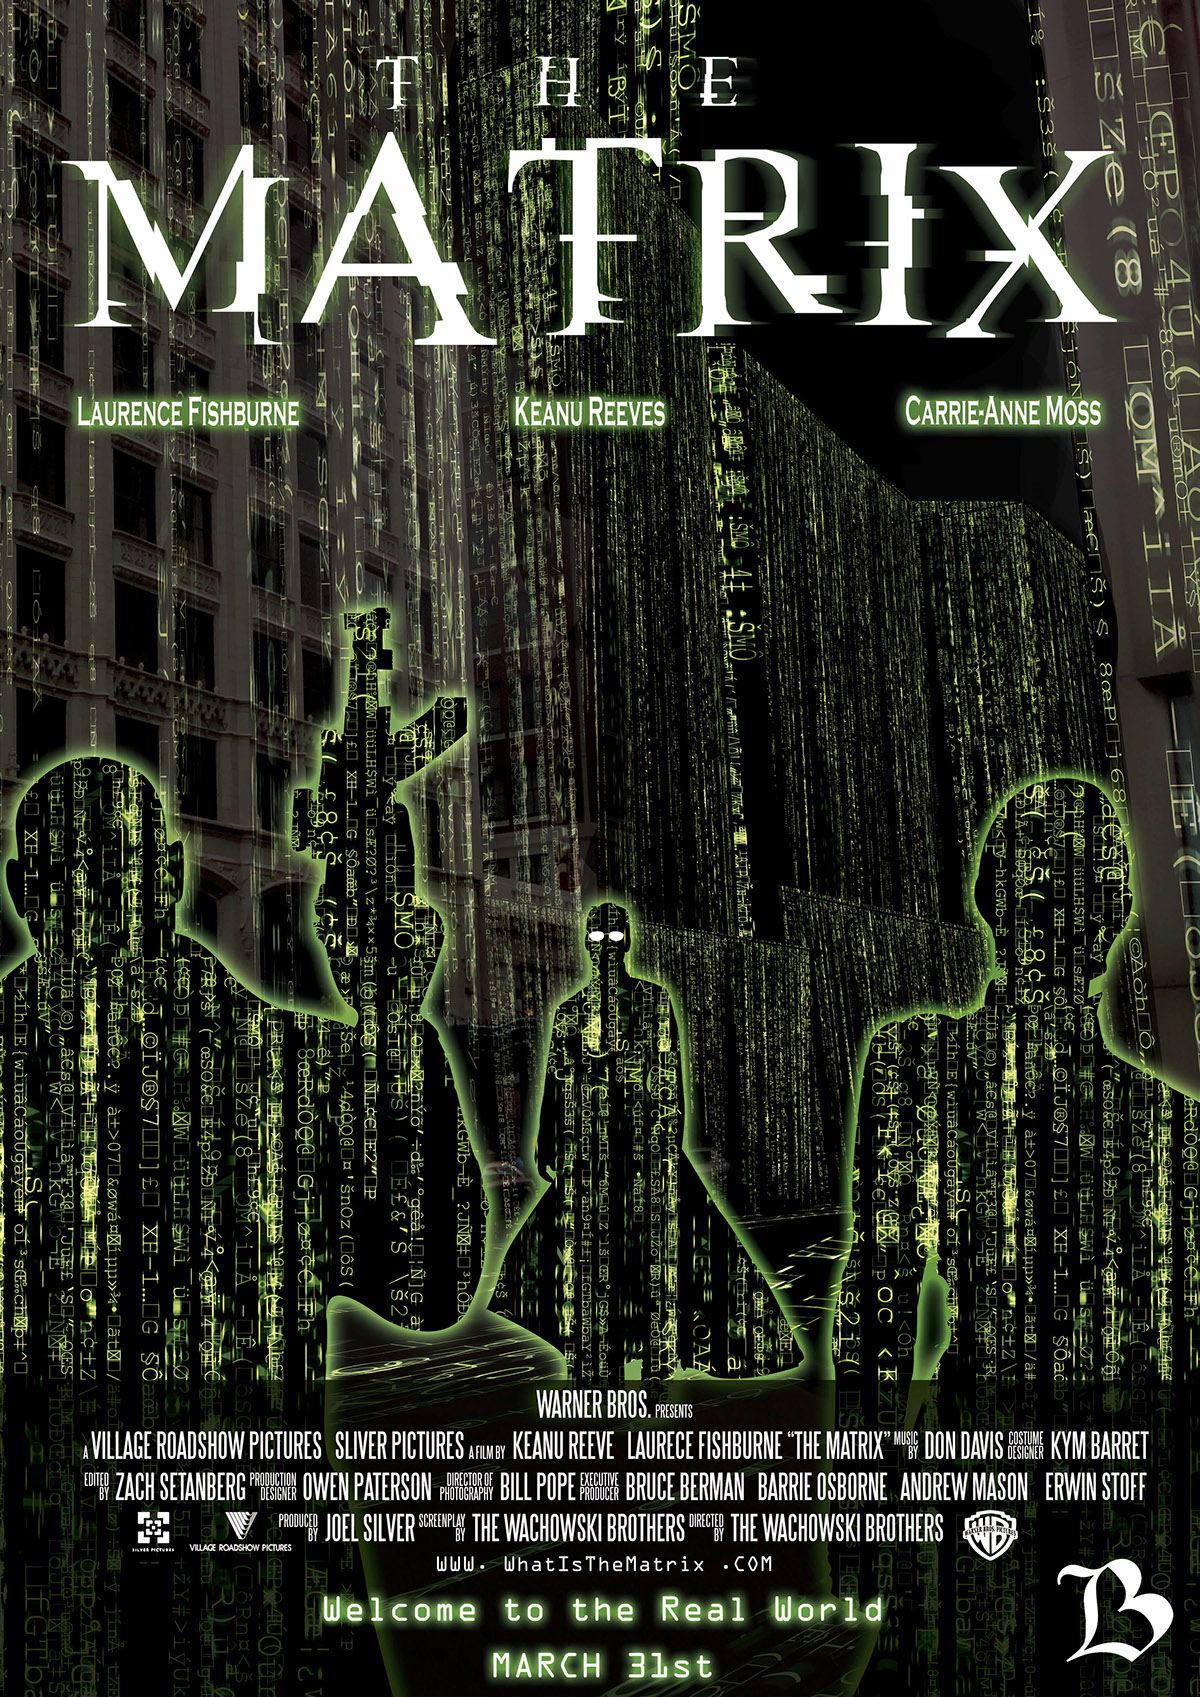 Movies posters the matrix matrix Movie Posters tracing movieposters